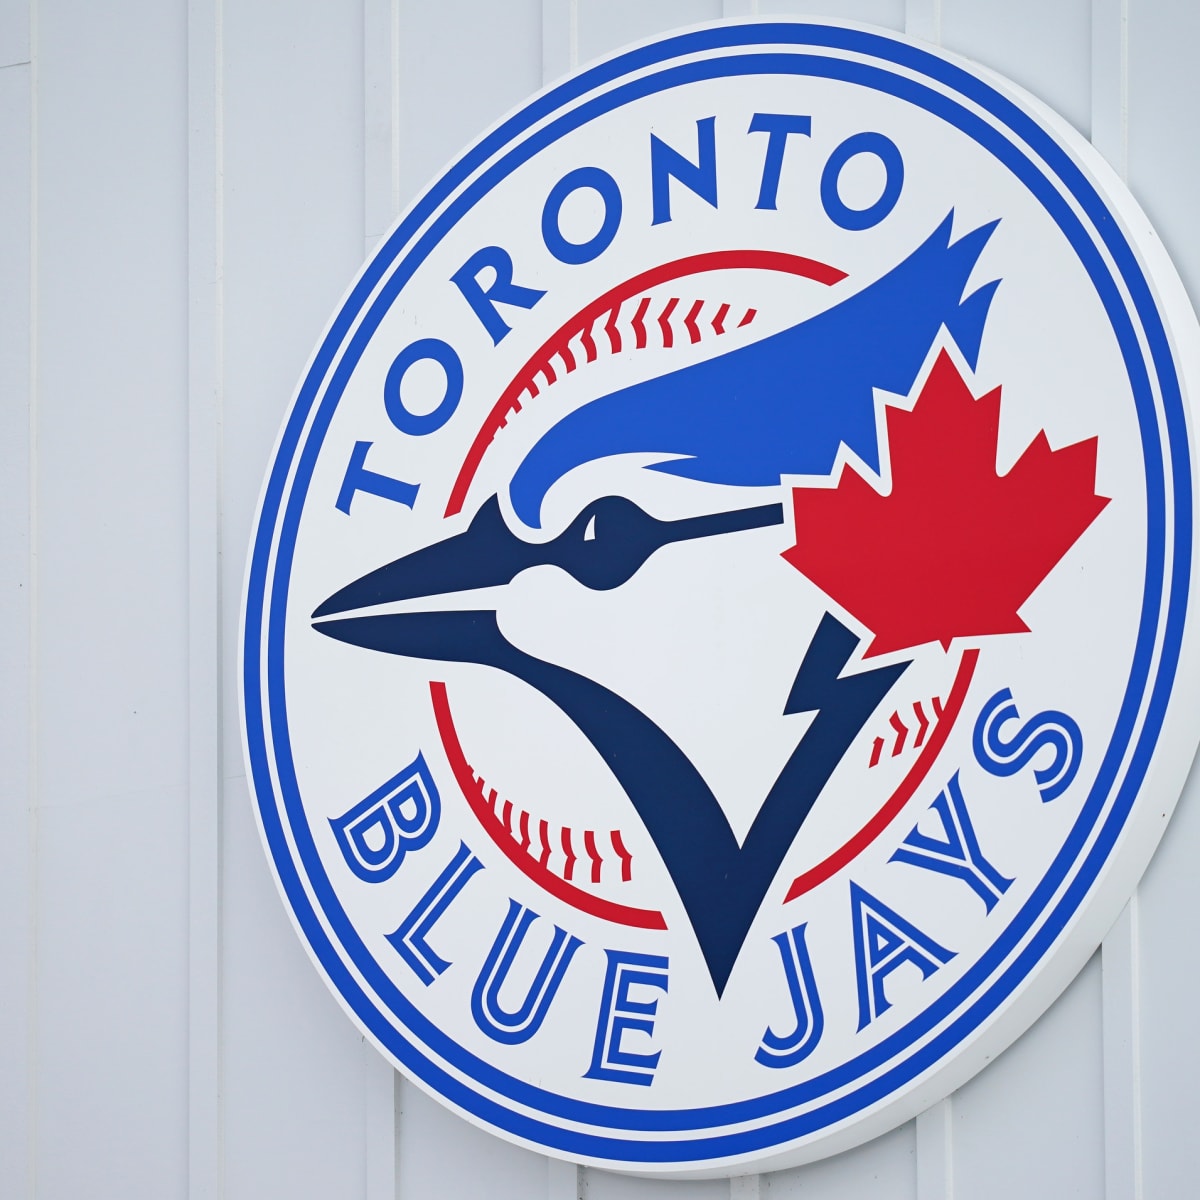 Severna Park native now coaching first base for Blue Jays